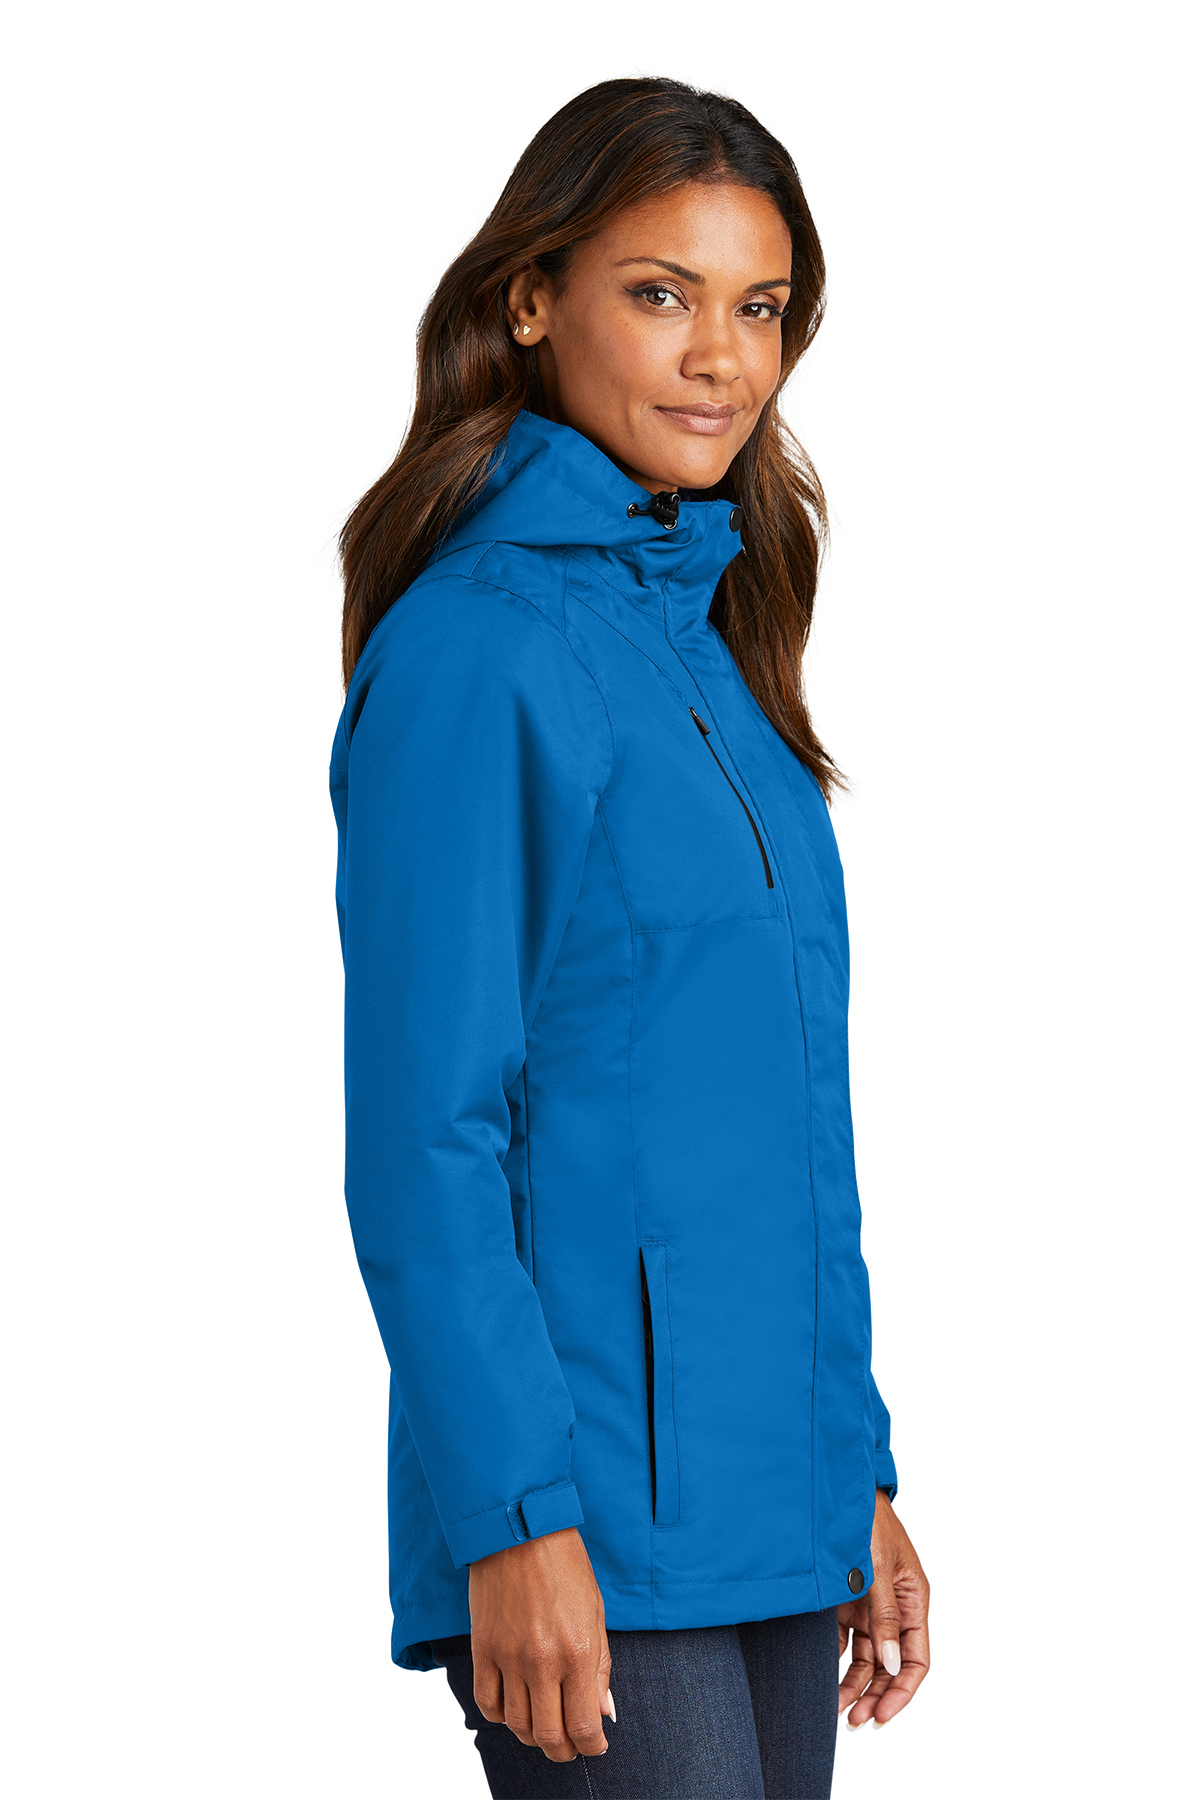 Ladies Port Product | SanMar | Jacket All-Conditions Authority